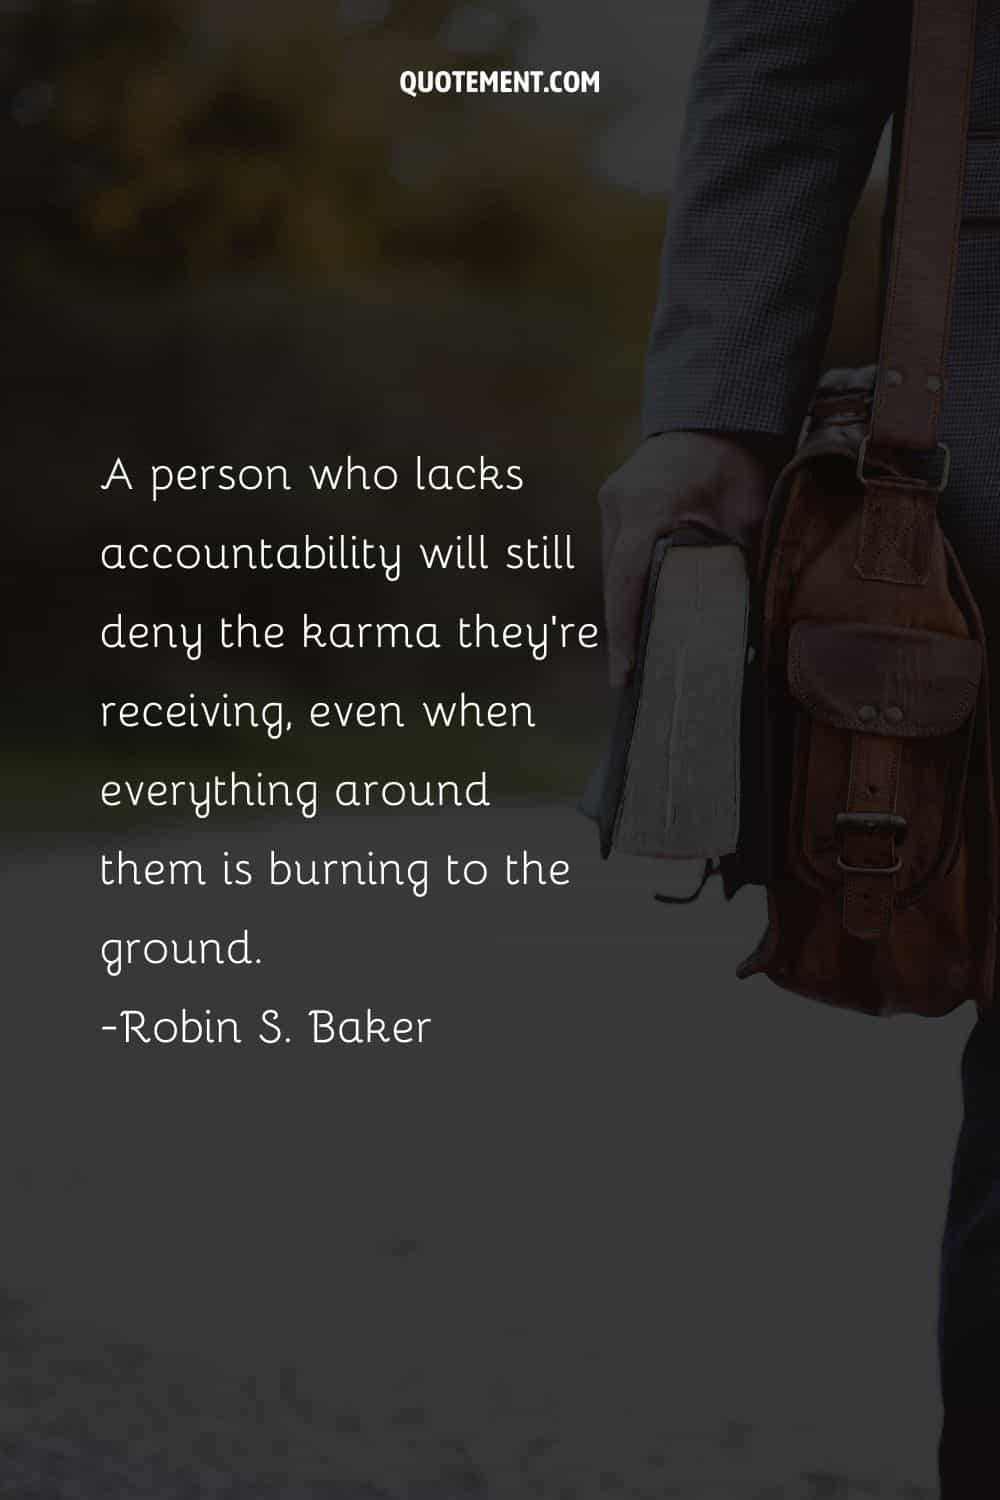 A person who lacks accountability will still deny the karma they're receiving, even when everything around them is burning to the ground